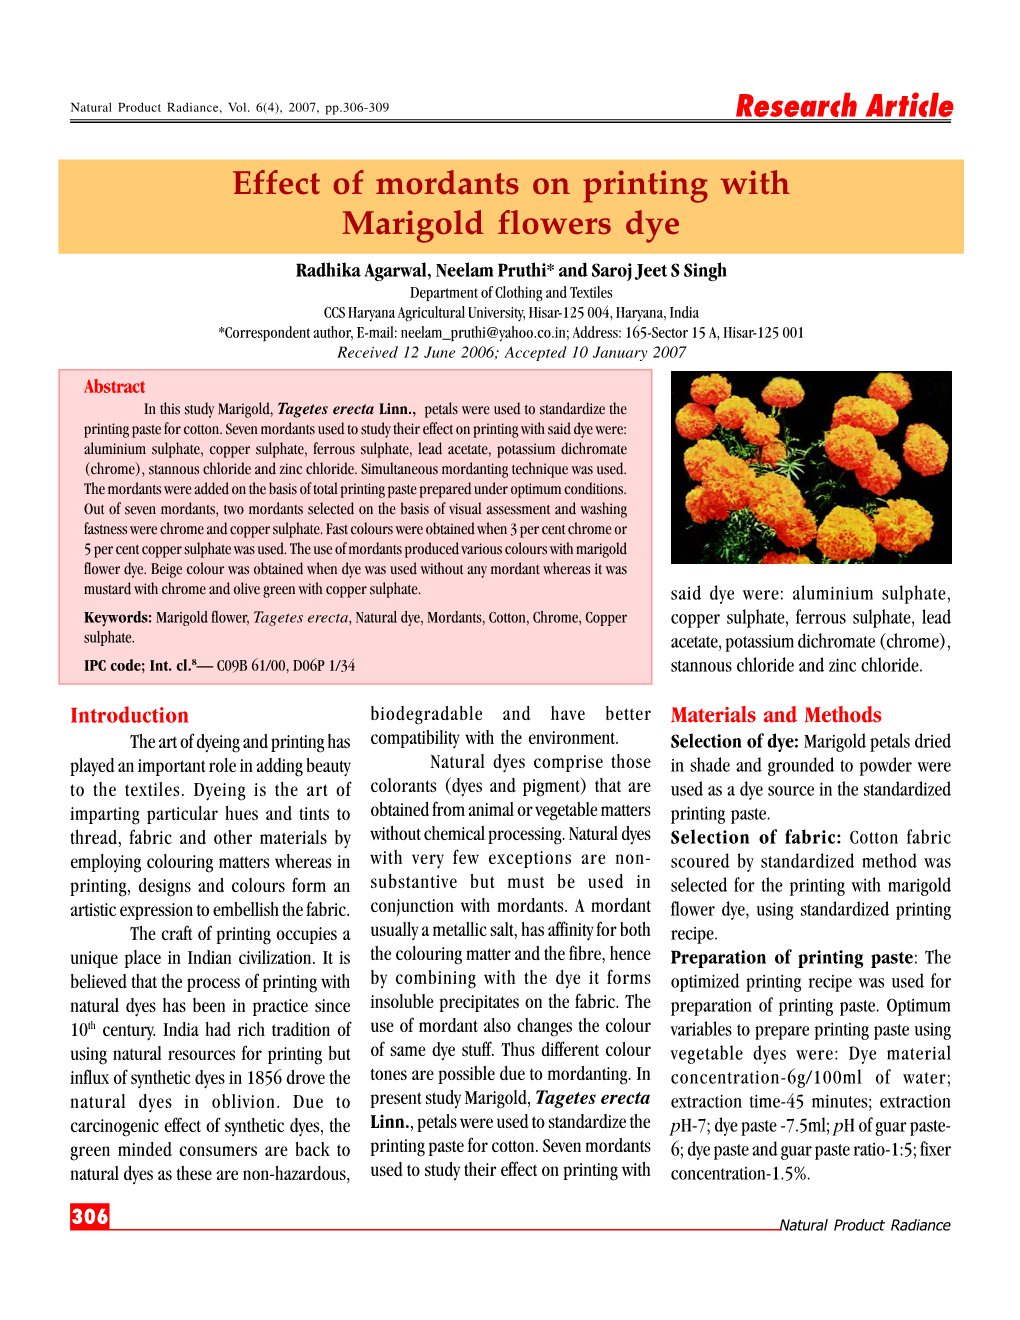 Effect of Mordants on Printing with Marigold Flowers